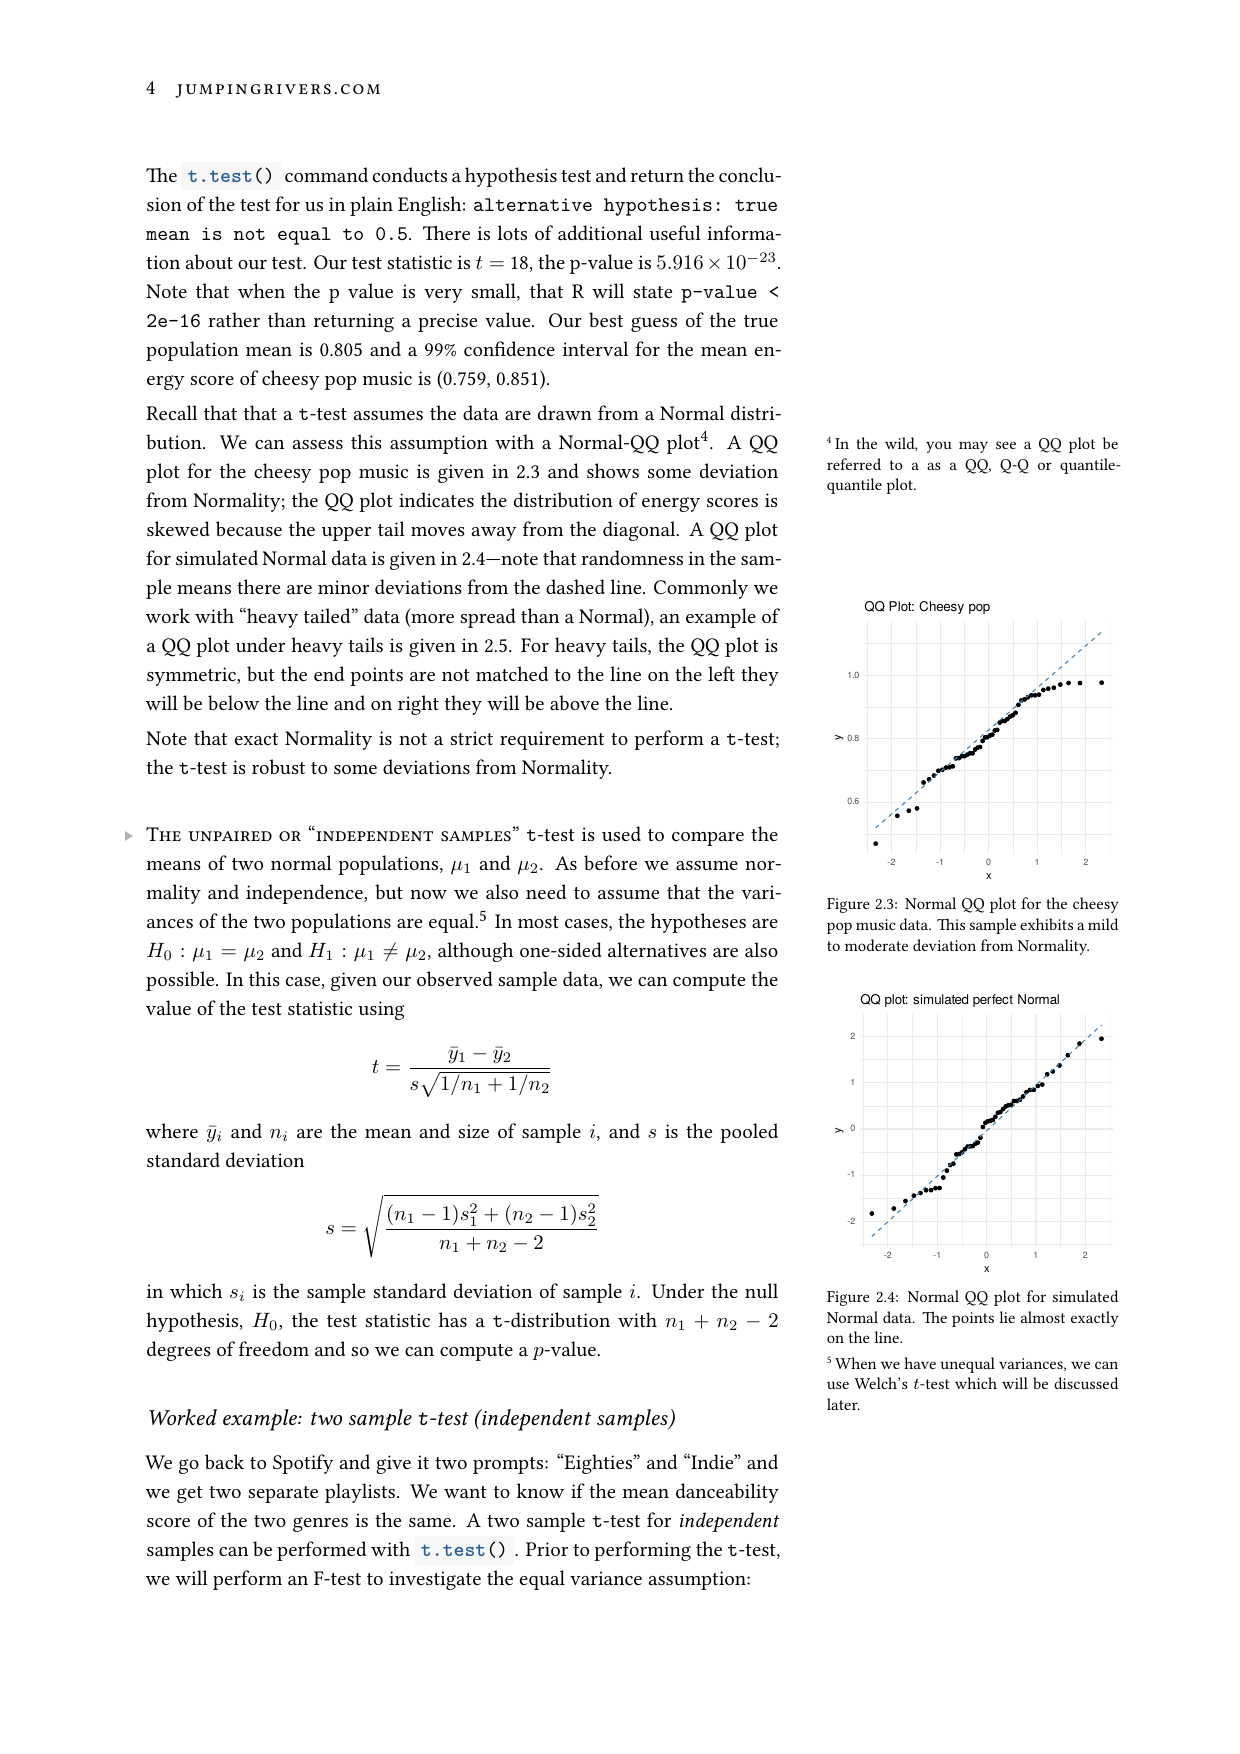 Page 5 of example course material for Statistical Modelling with R